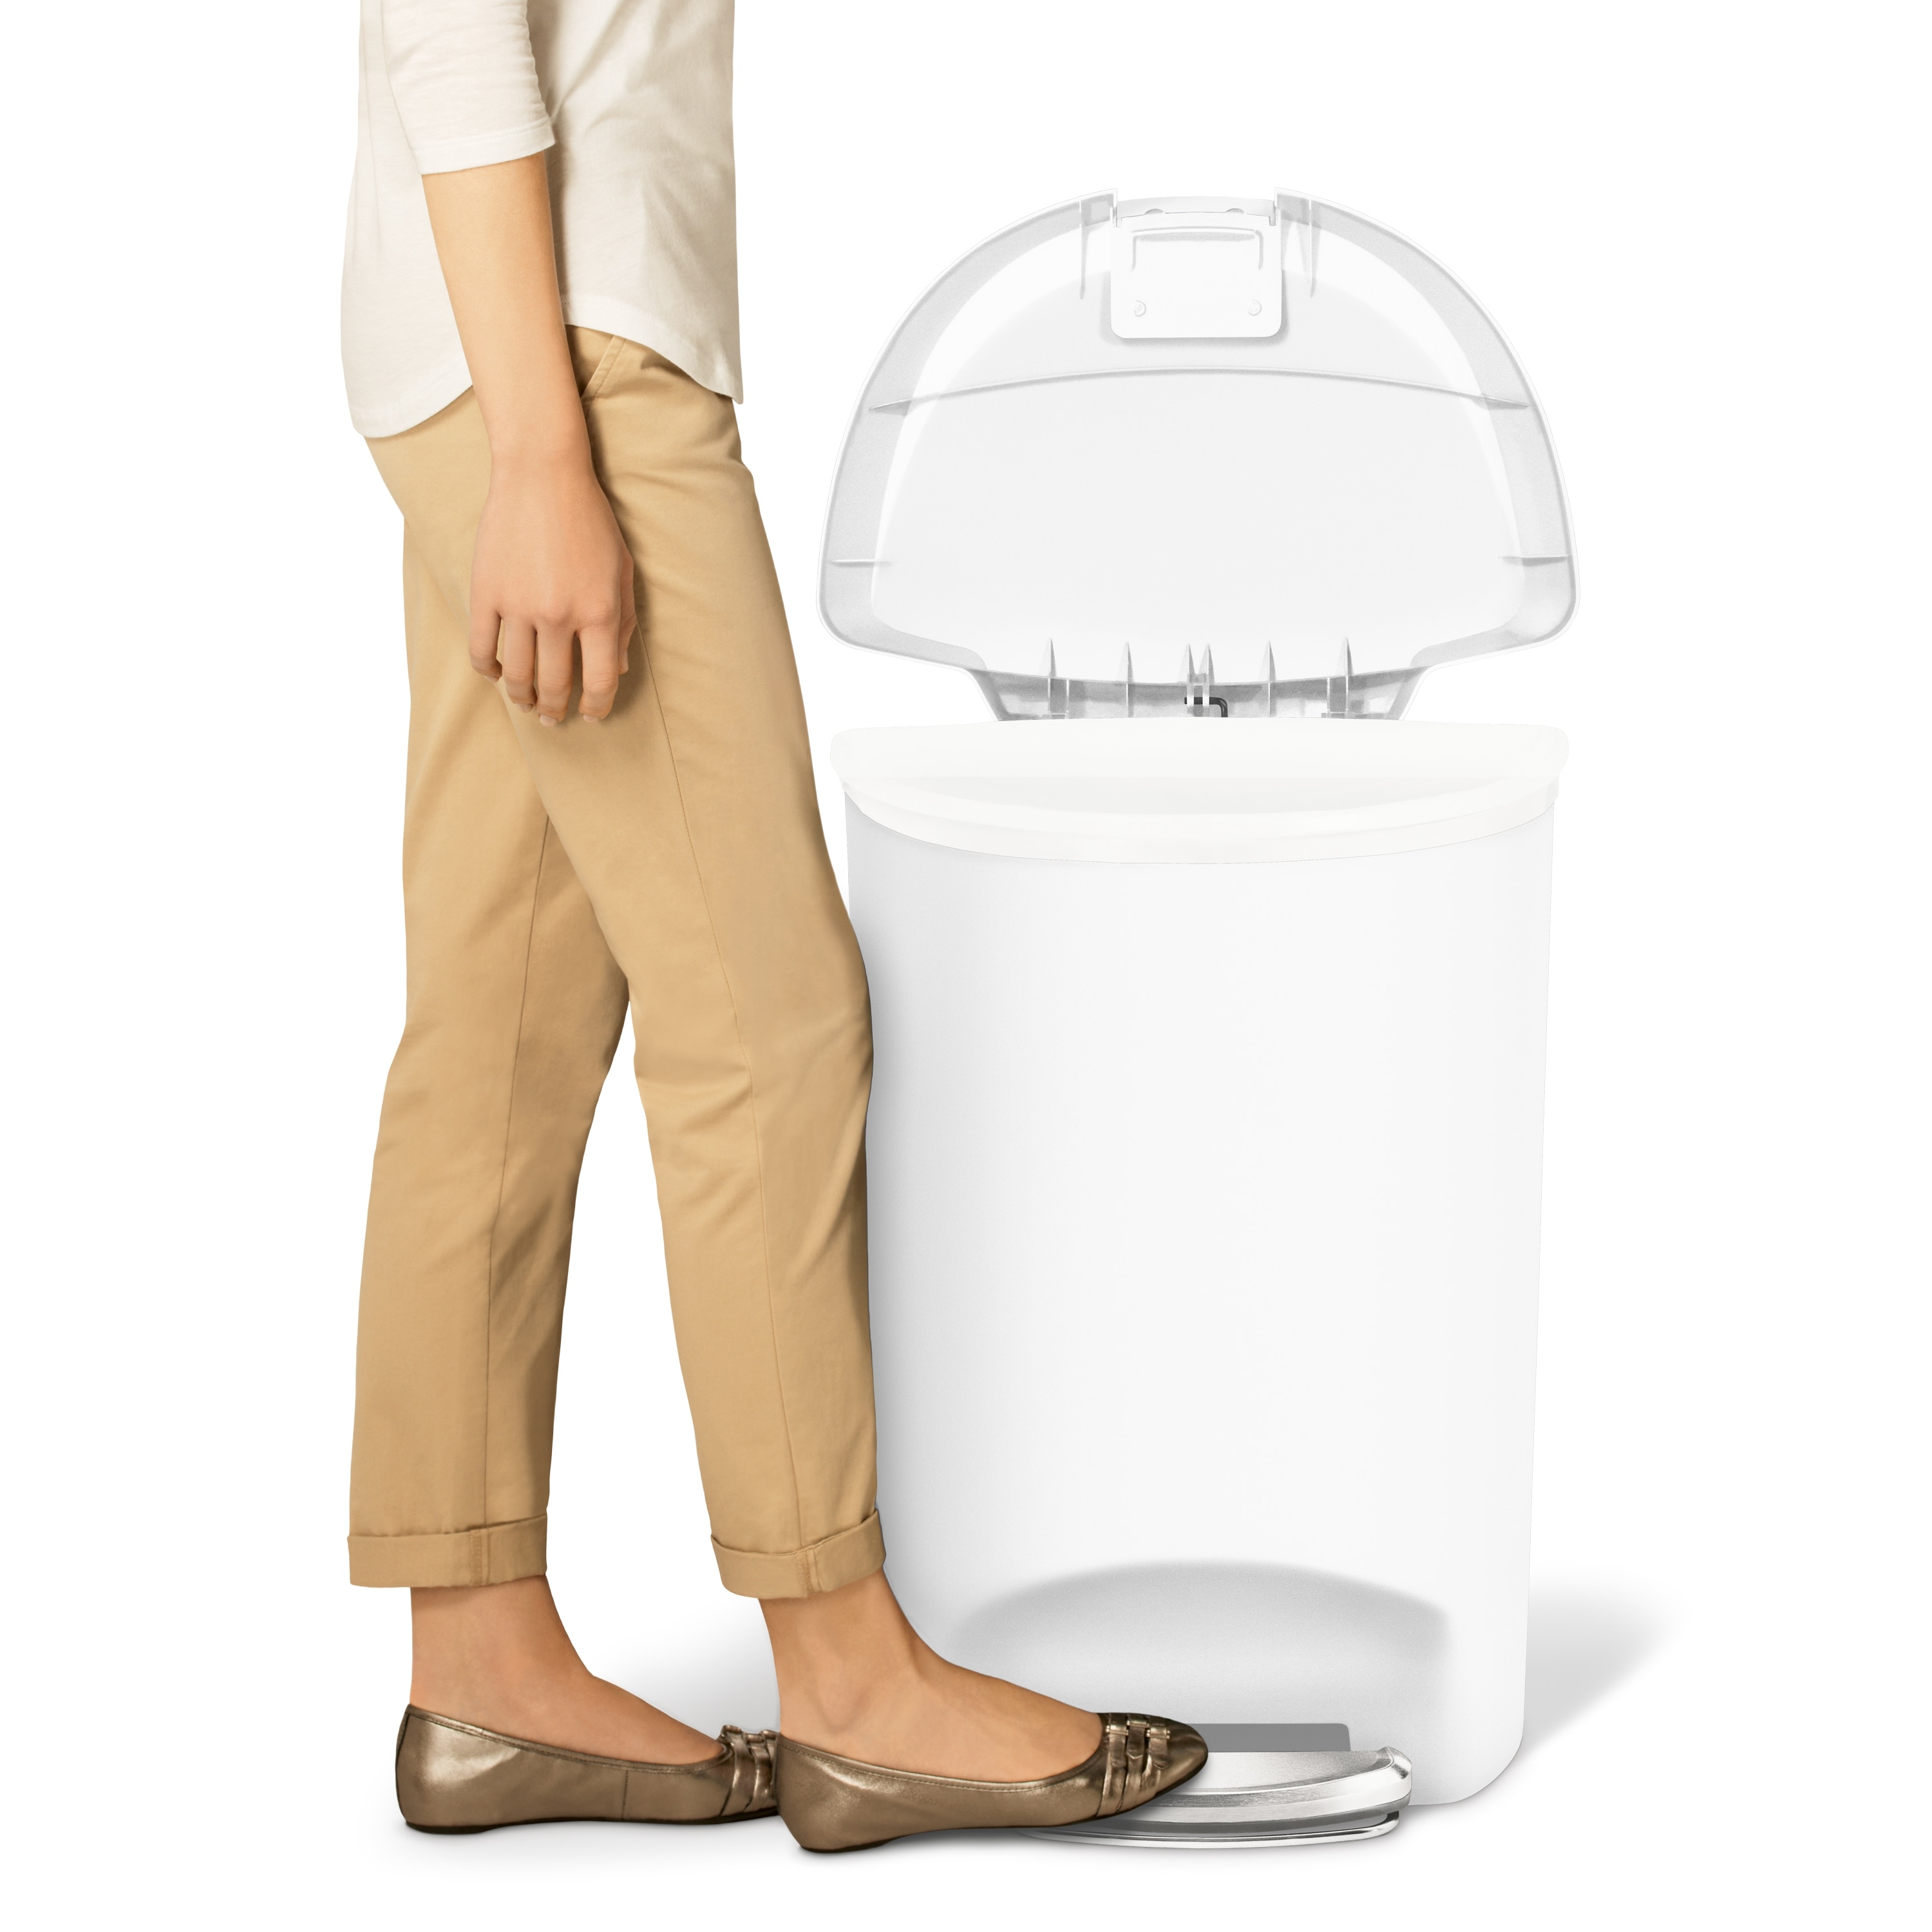 Simple Human Trash Cans for sale in Appleton, Wisconsin